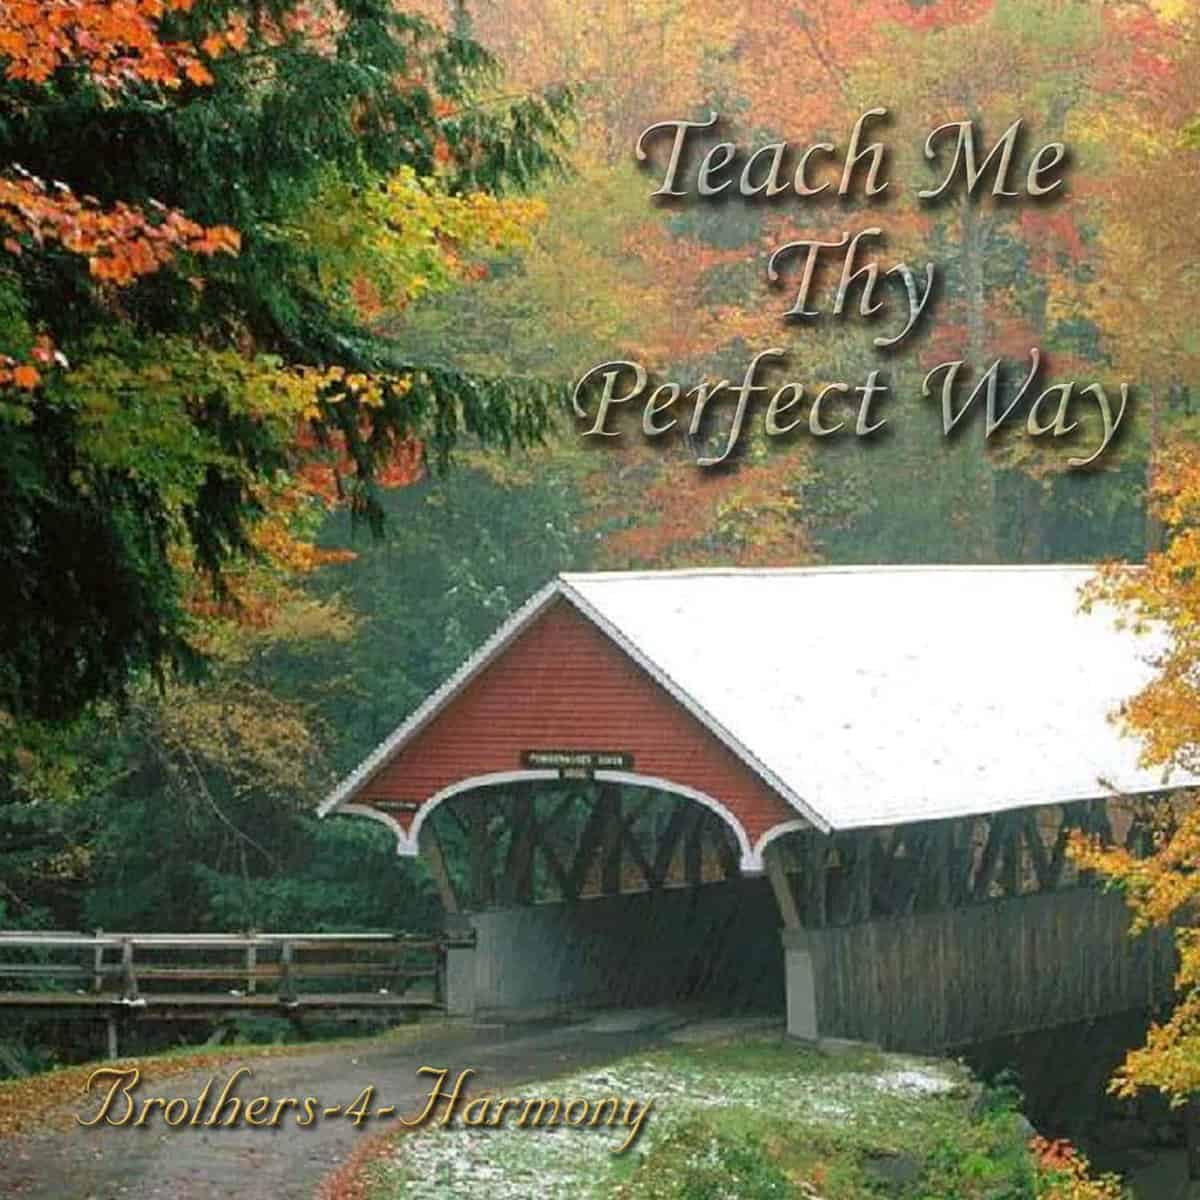 Cover image "Teach Me Thy Perfect Way" by Brothers-4-Harmony